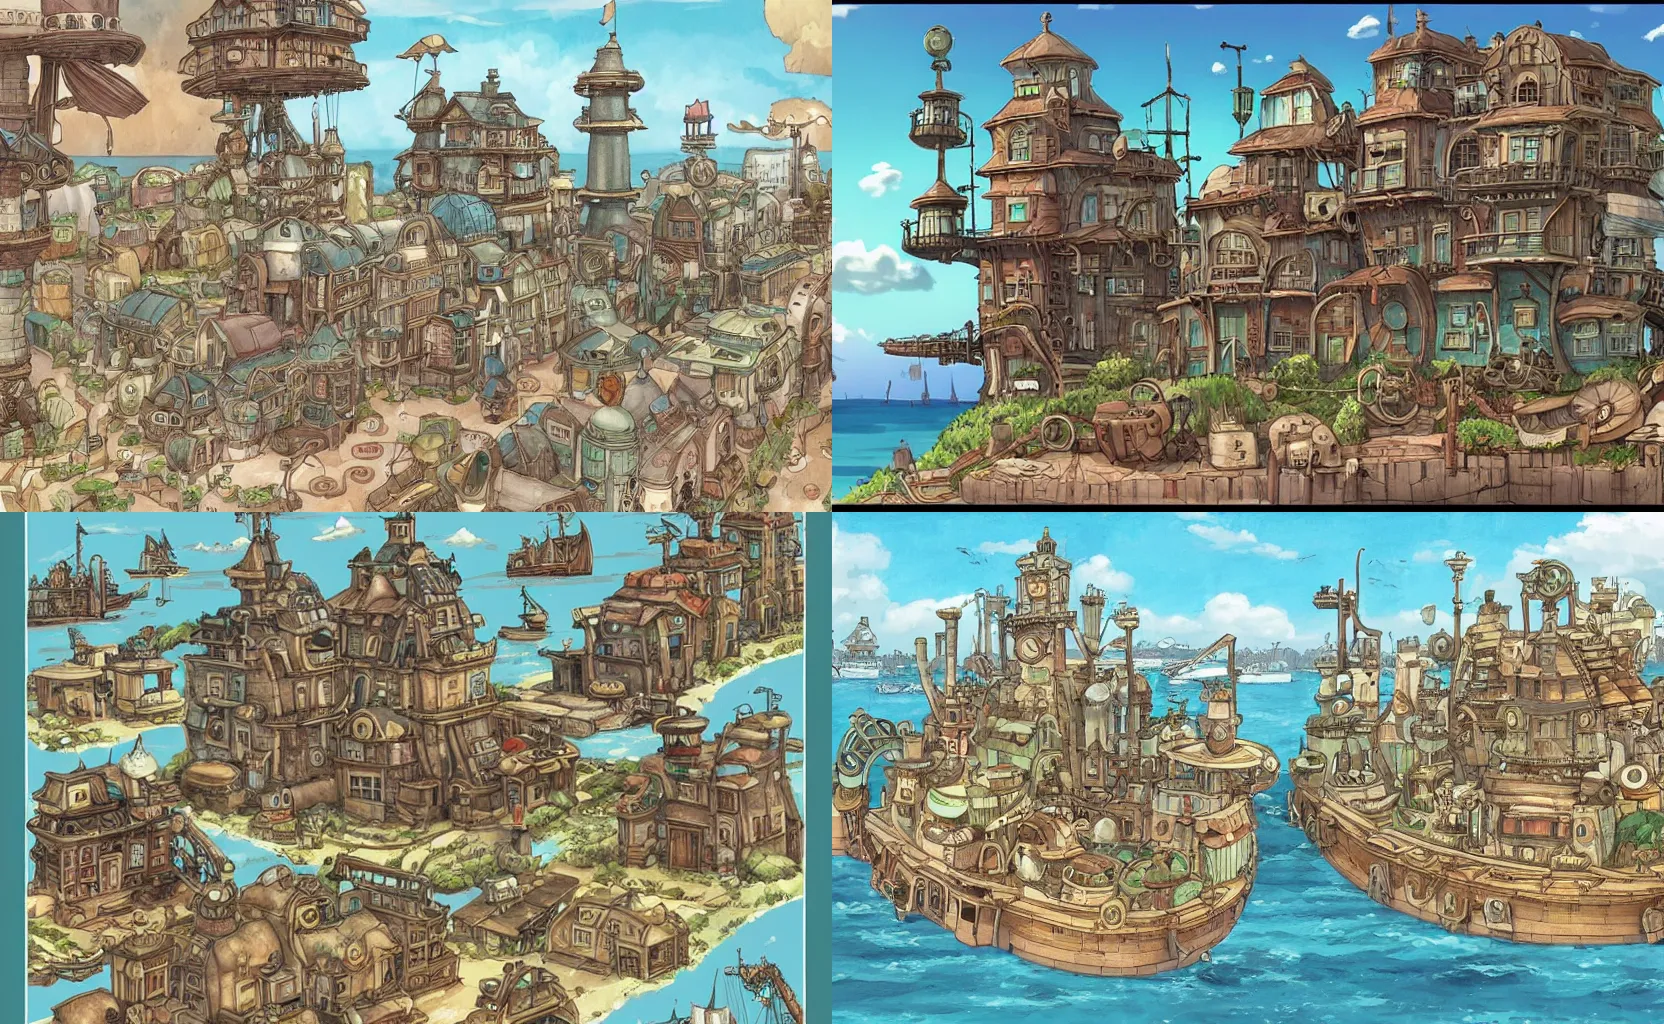 Prompt: a steampunk town by the sea, in the style of Studio Ghibli